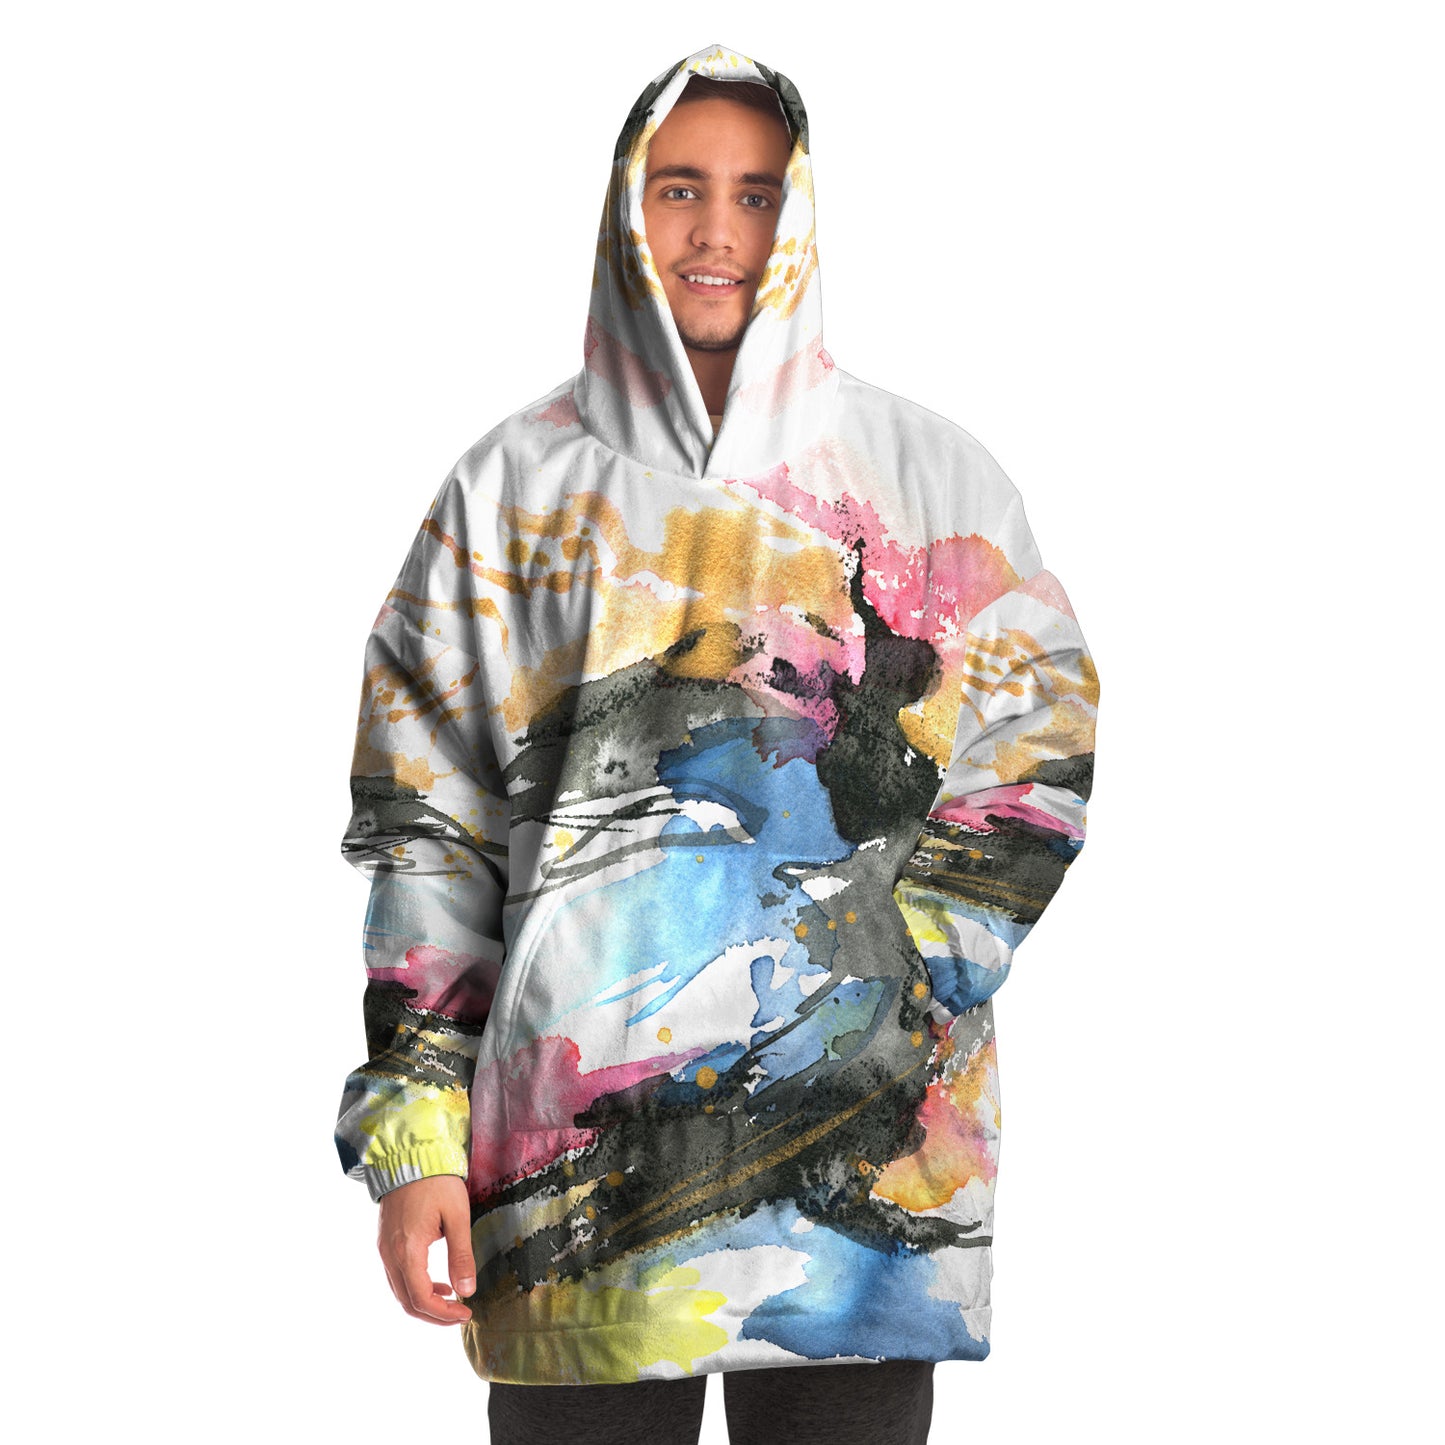 Can't Stop This Fire Snug Hoodie Wearable Blanket